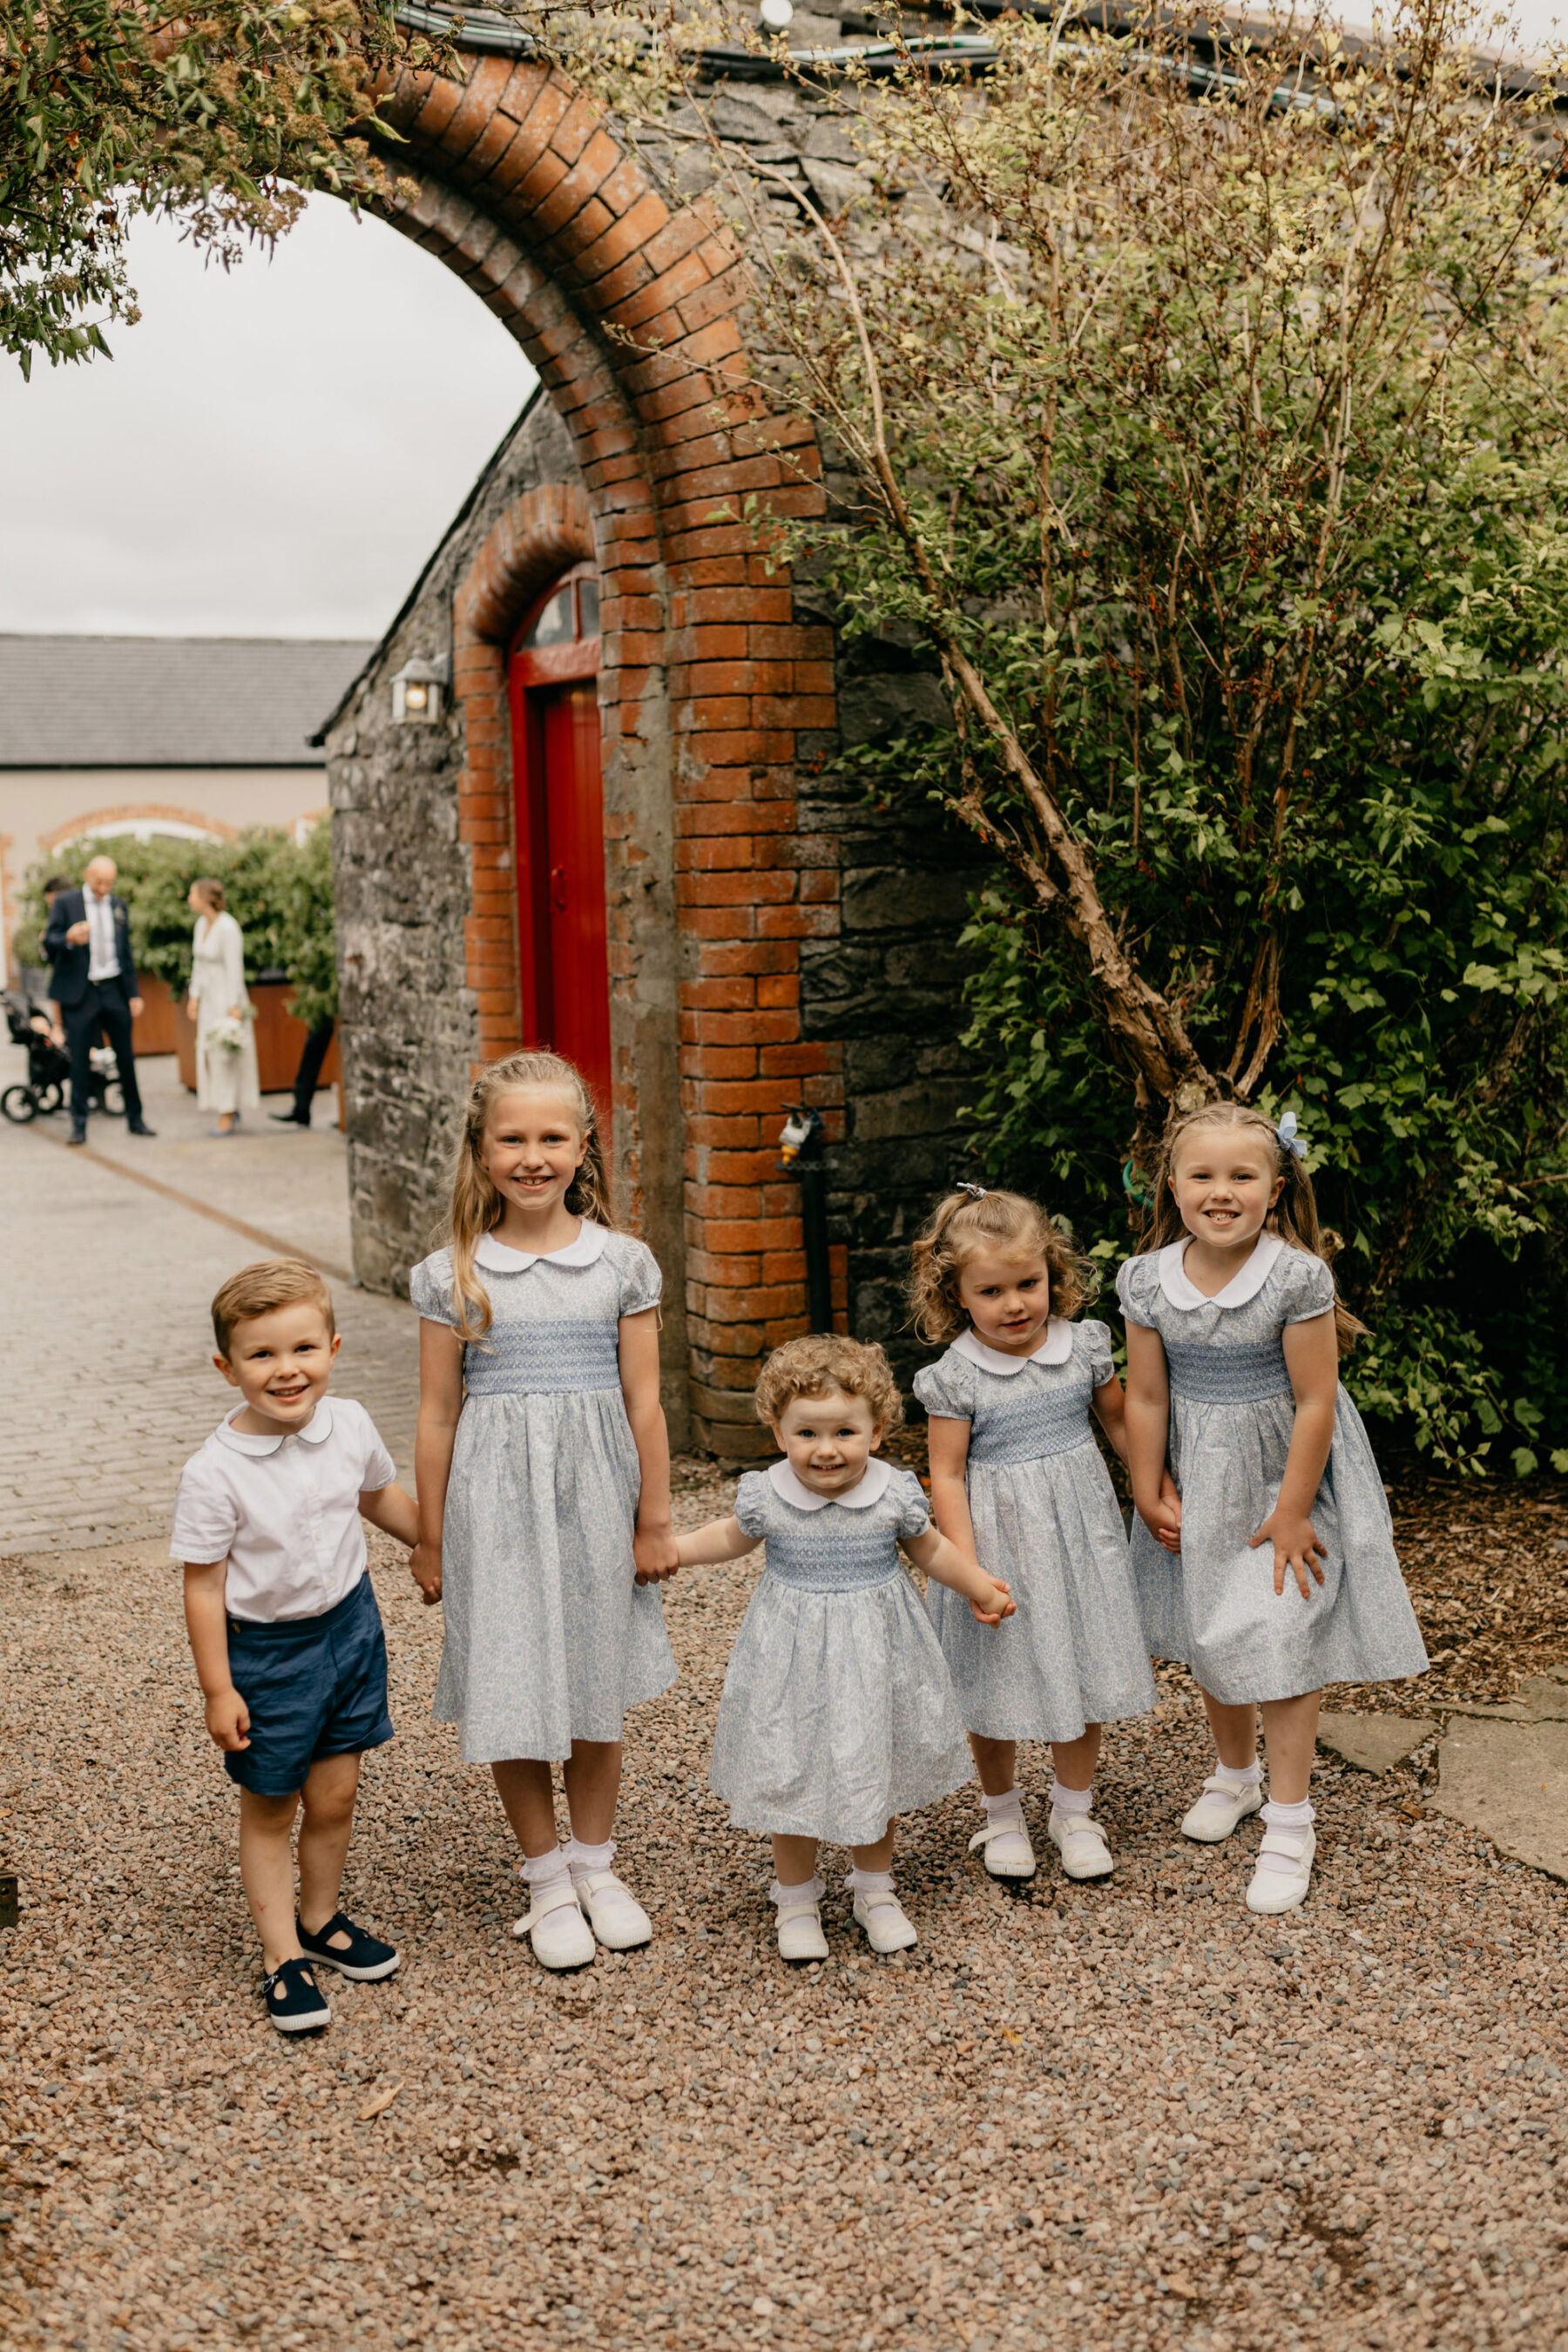 Flower girls in cute pale blue Liberty print dresses with Peter Pan collar. Page boy in shorts and top. All from Trotters Childrenswear.